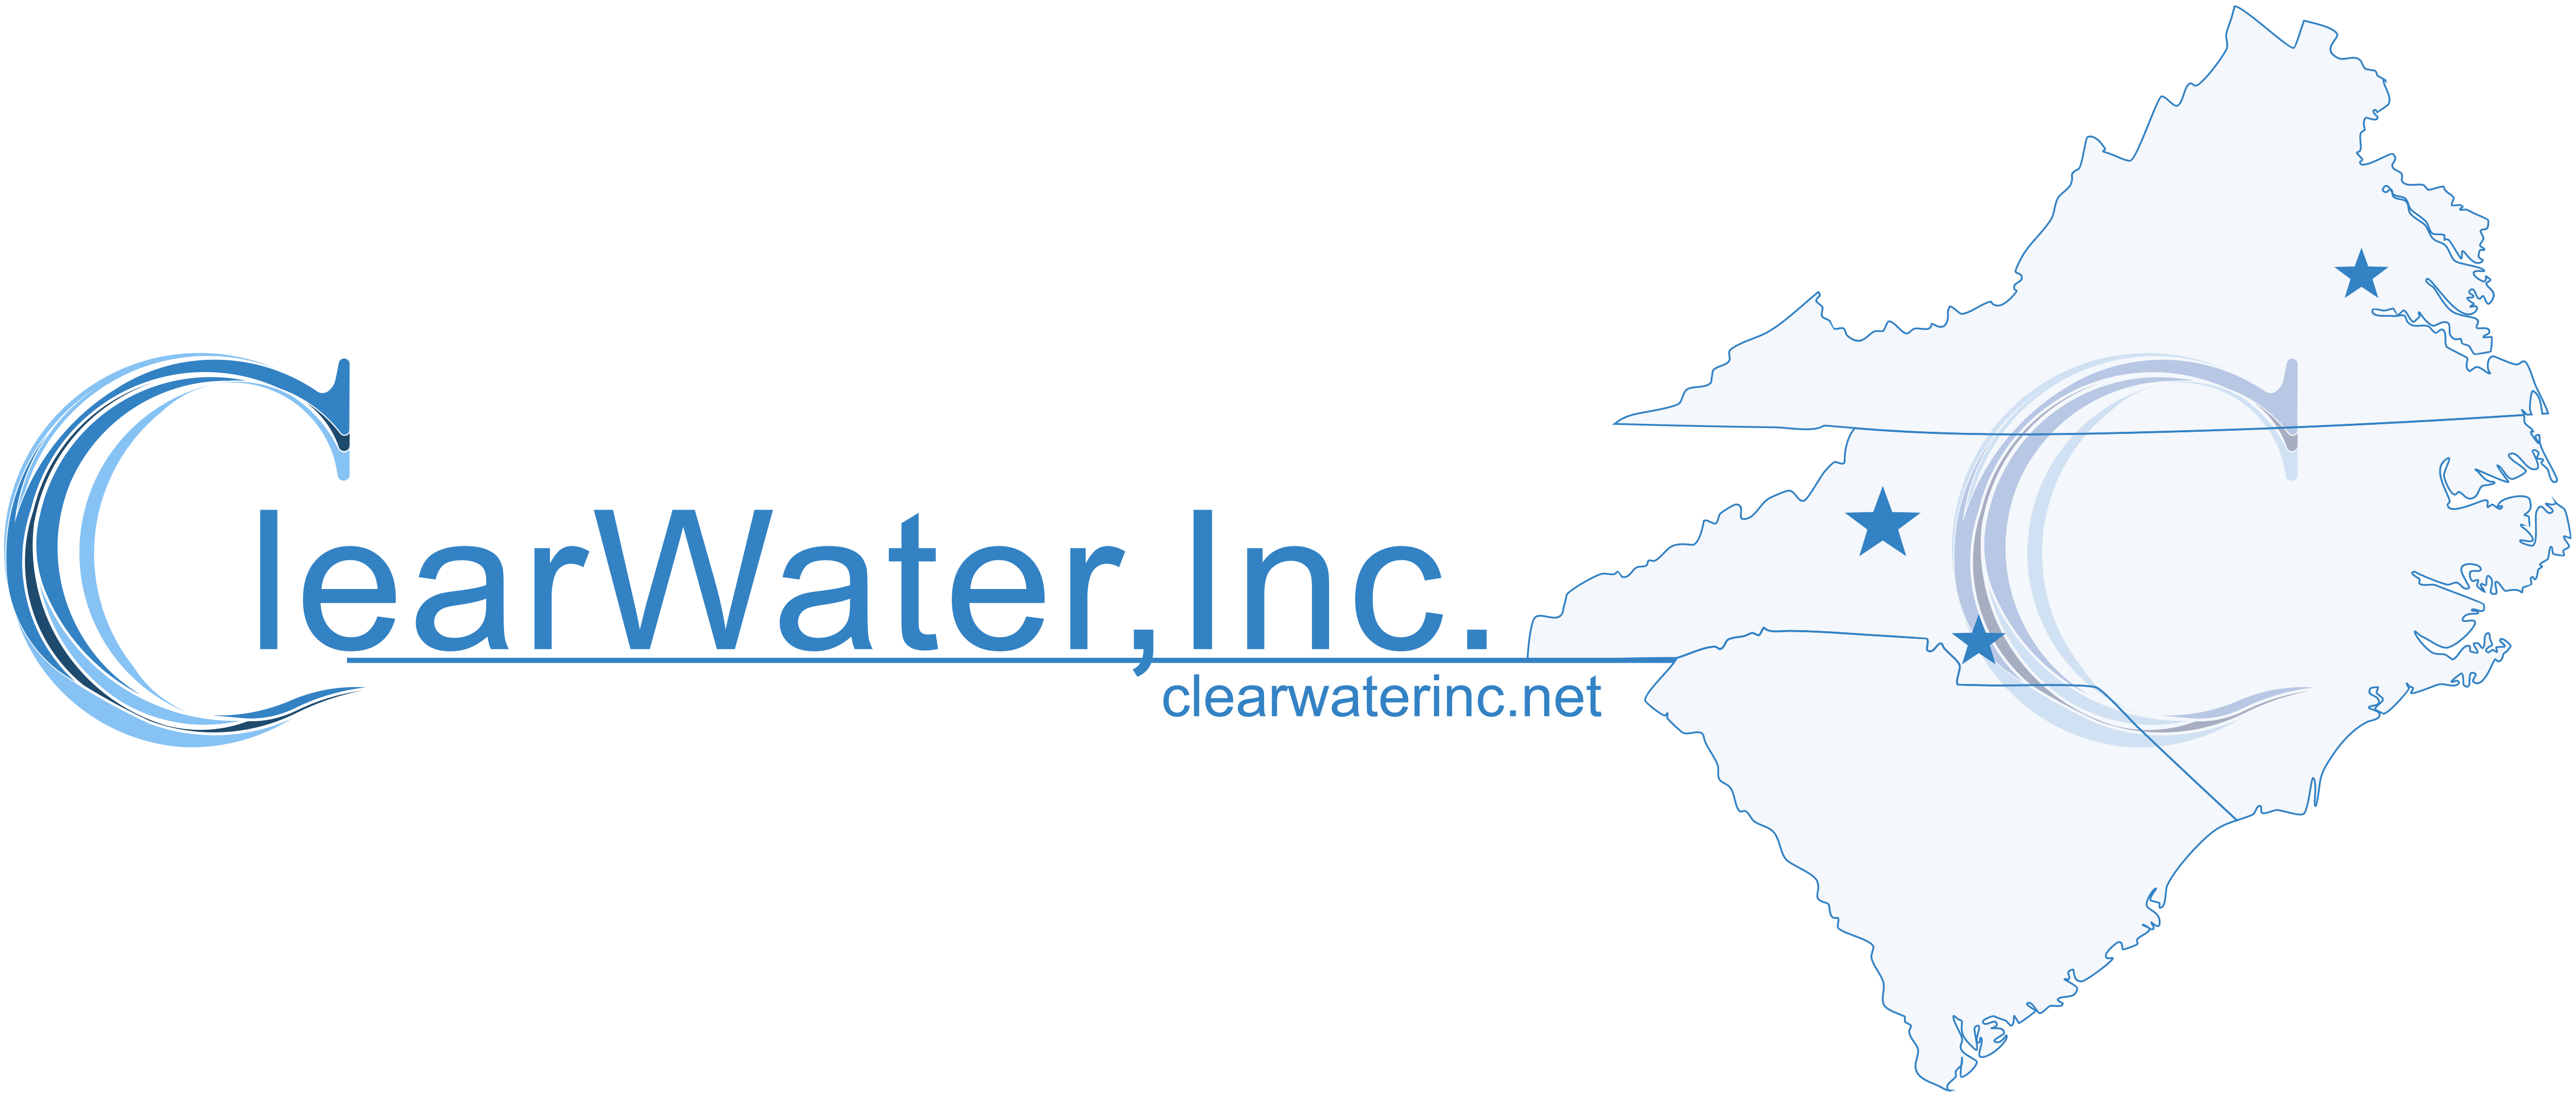 ClearWater_States_Horizontal_Blue_on_White-4d887e532caf42e5f93640c40587feb4